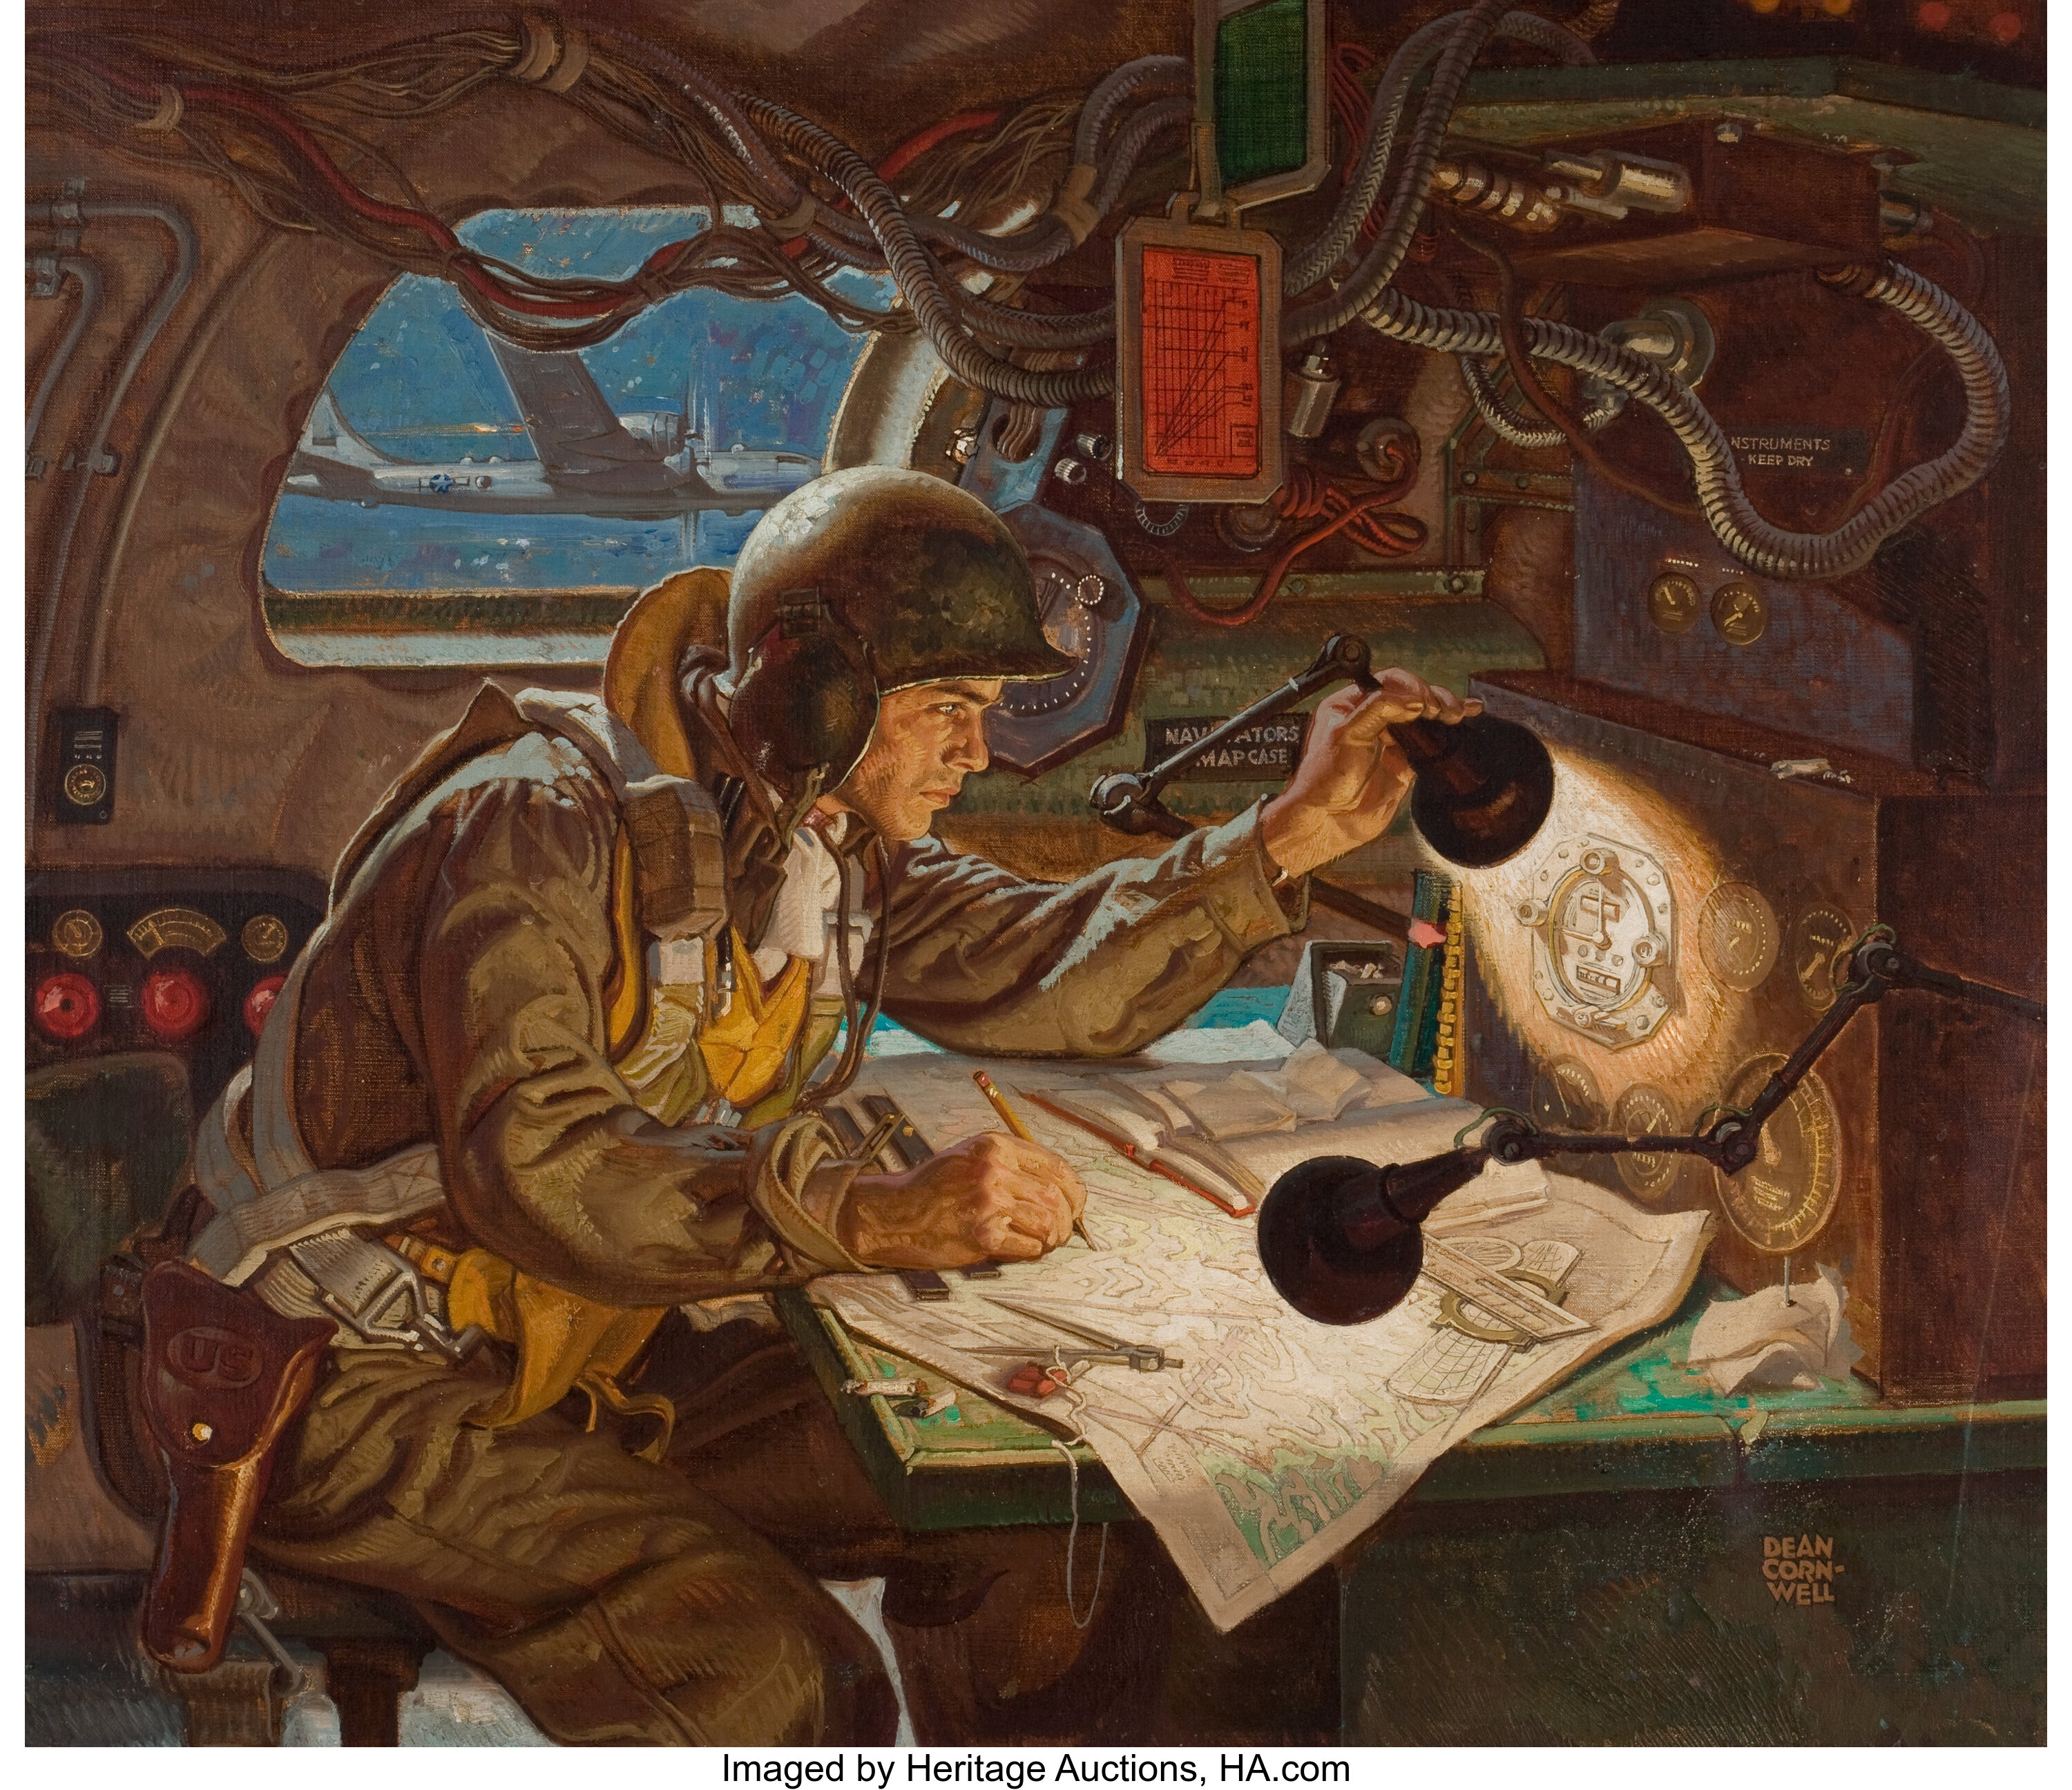 DEAN CORNWELL (American, 1892-1960). On Target- Let's Finish the